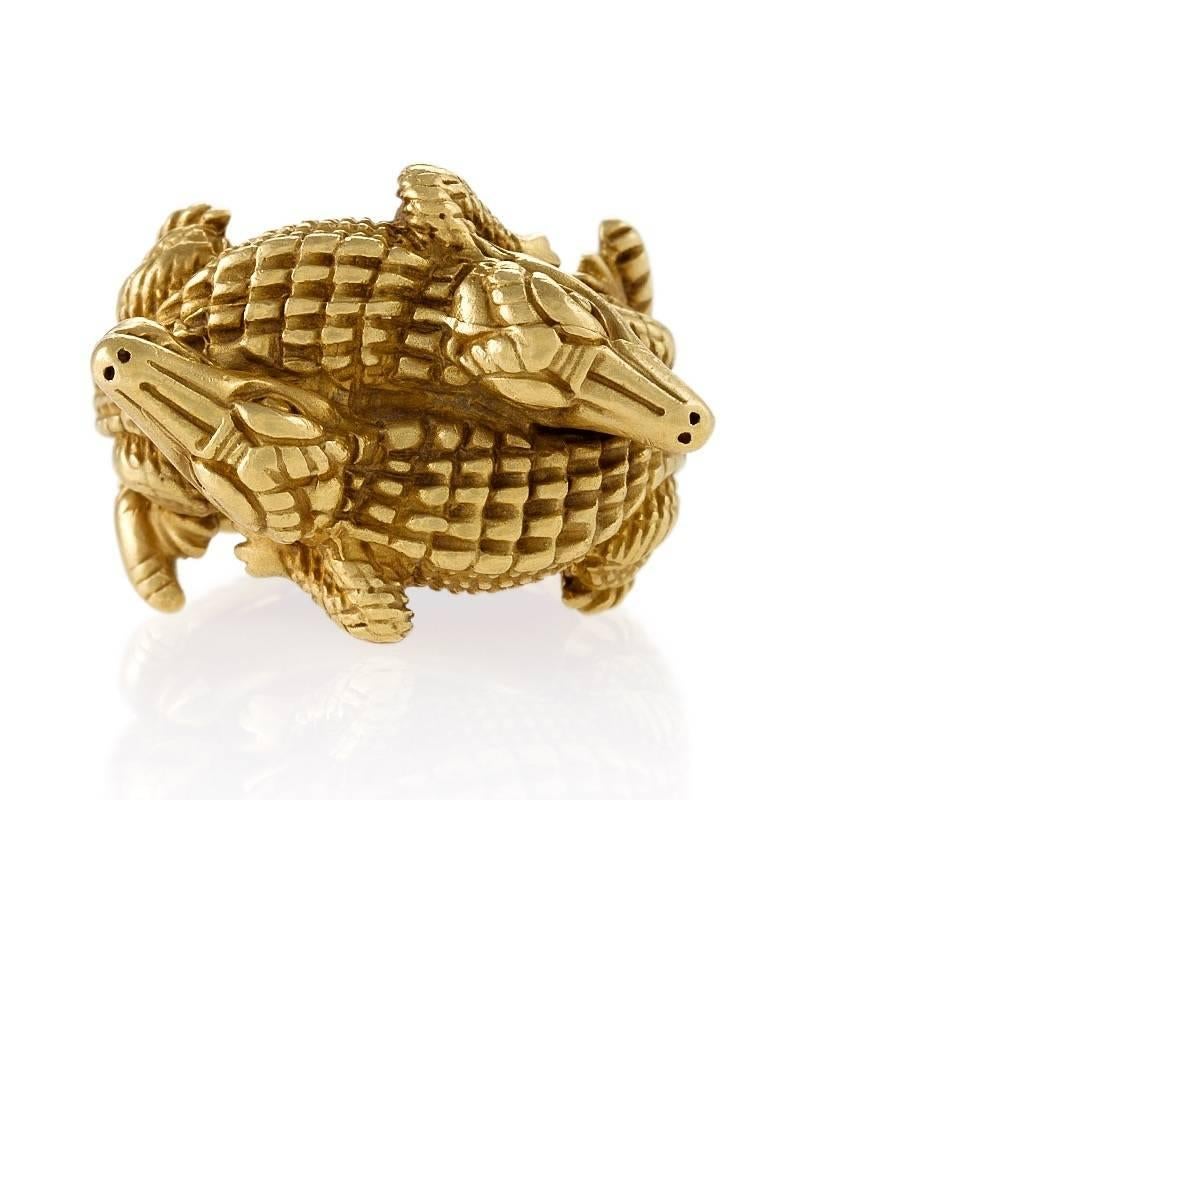 An American Estate 18 karat gold ring by Barry Kieselstein-Cord. The heavily detailed ring is designed in his iconic alligator motif. This particular ring with the double alligators is extremely rare. Circa 2000.

Signed, 